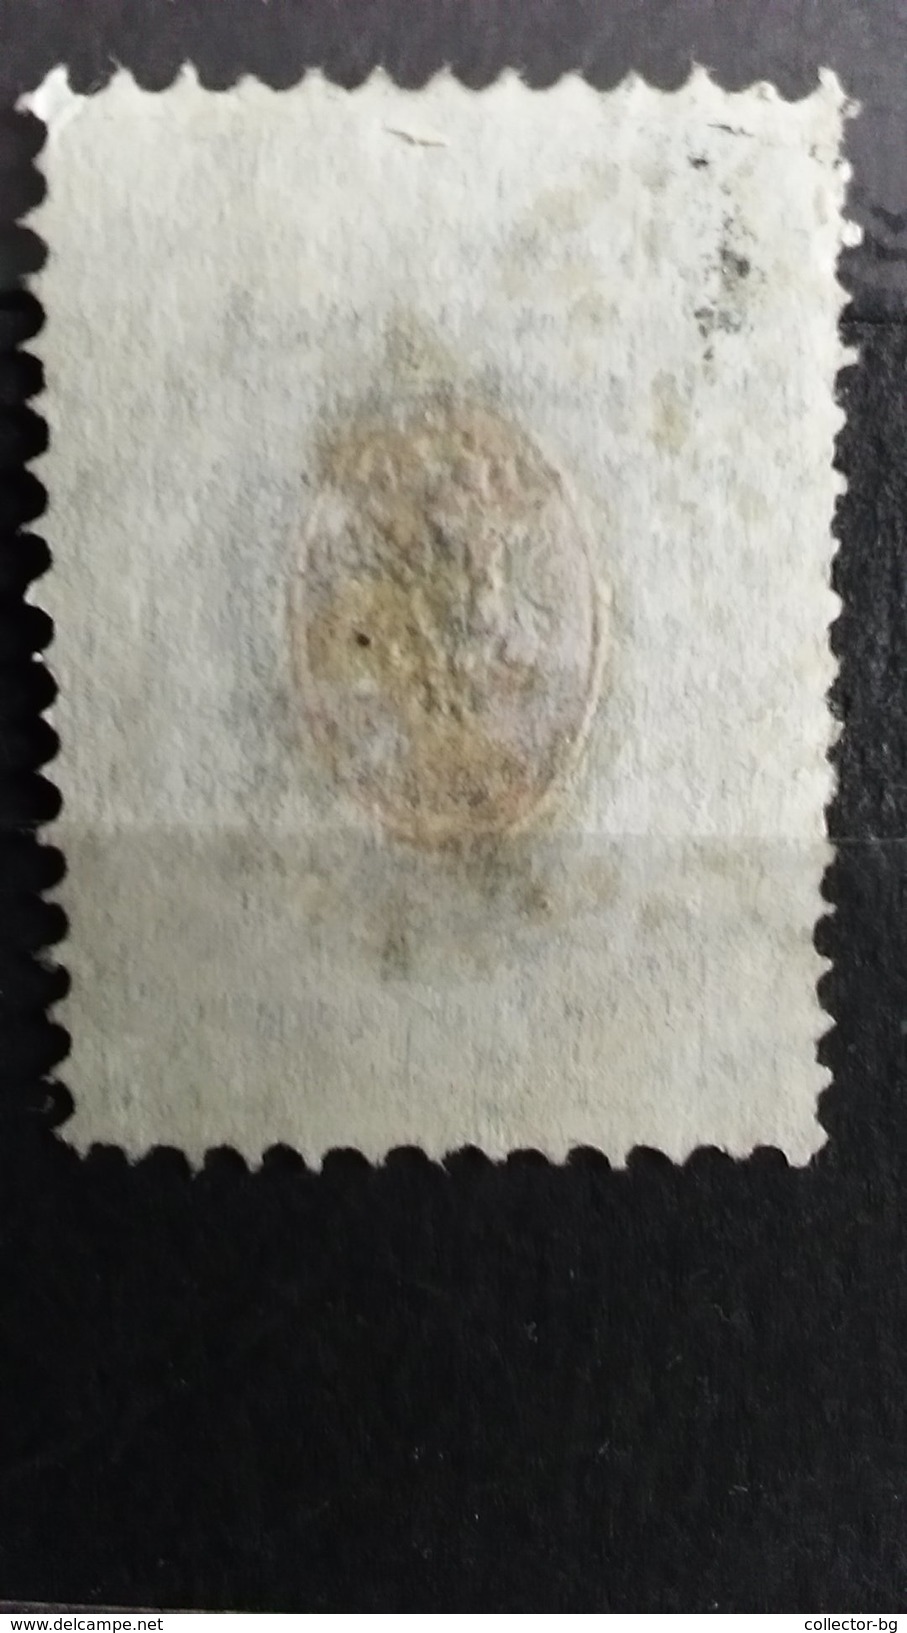 RARE 8 KOP RUSSIA WMK 1875 STAMP TIMBRE - Unused Stamps